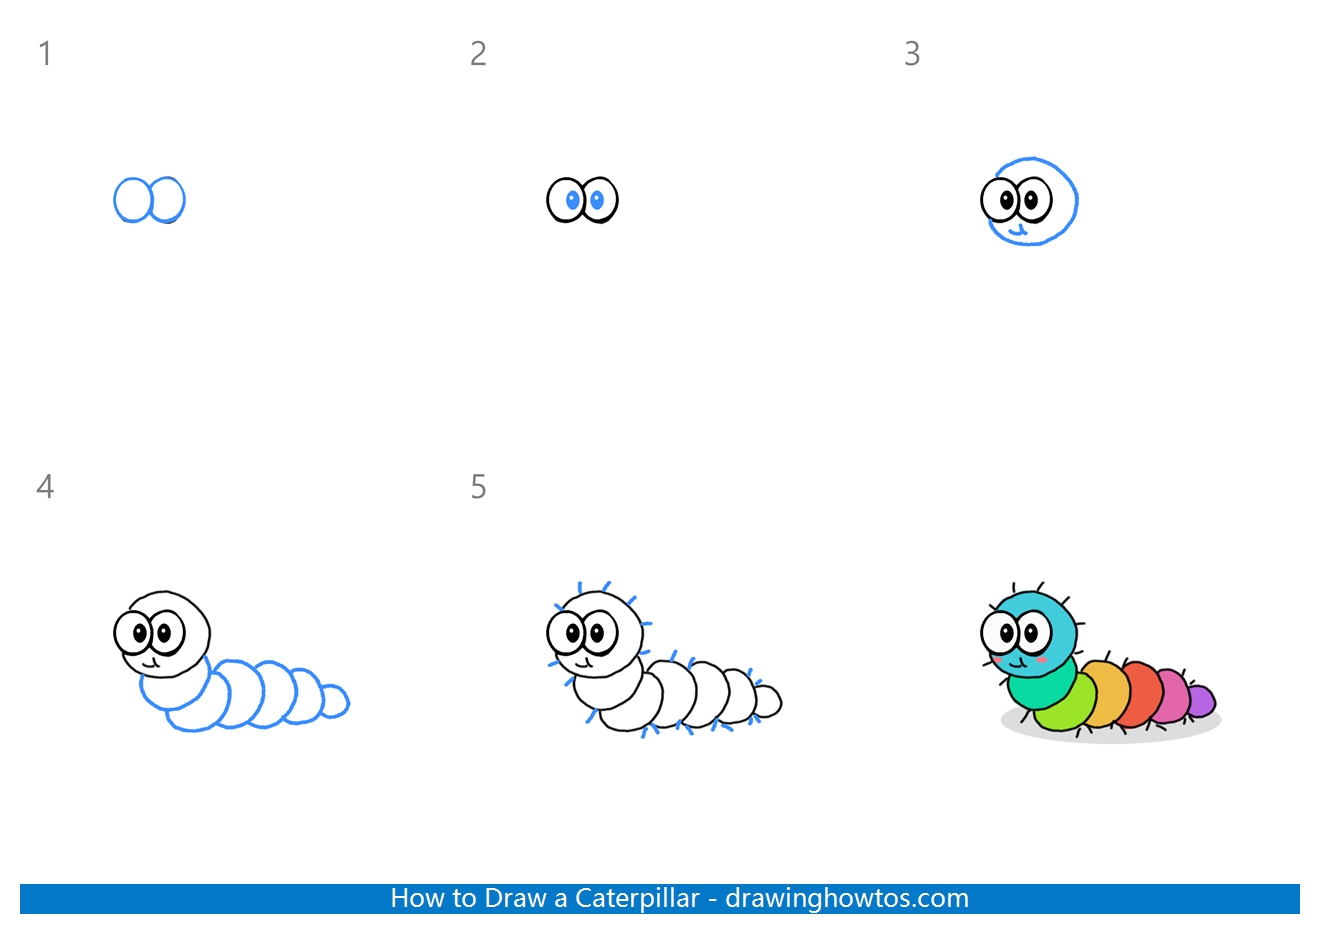 How to Draw a Caterpillar Step by Step